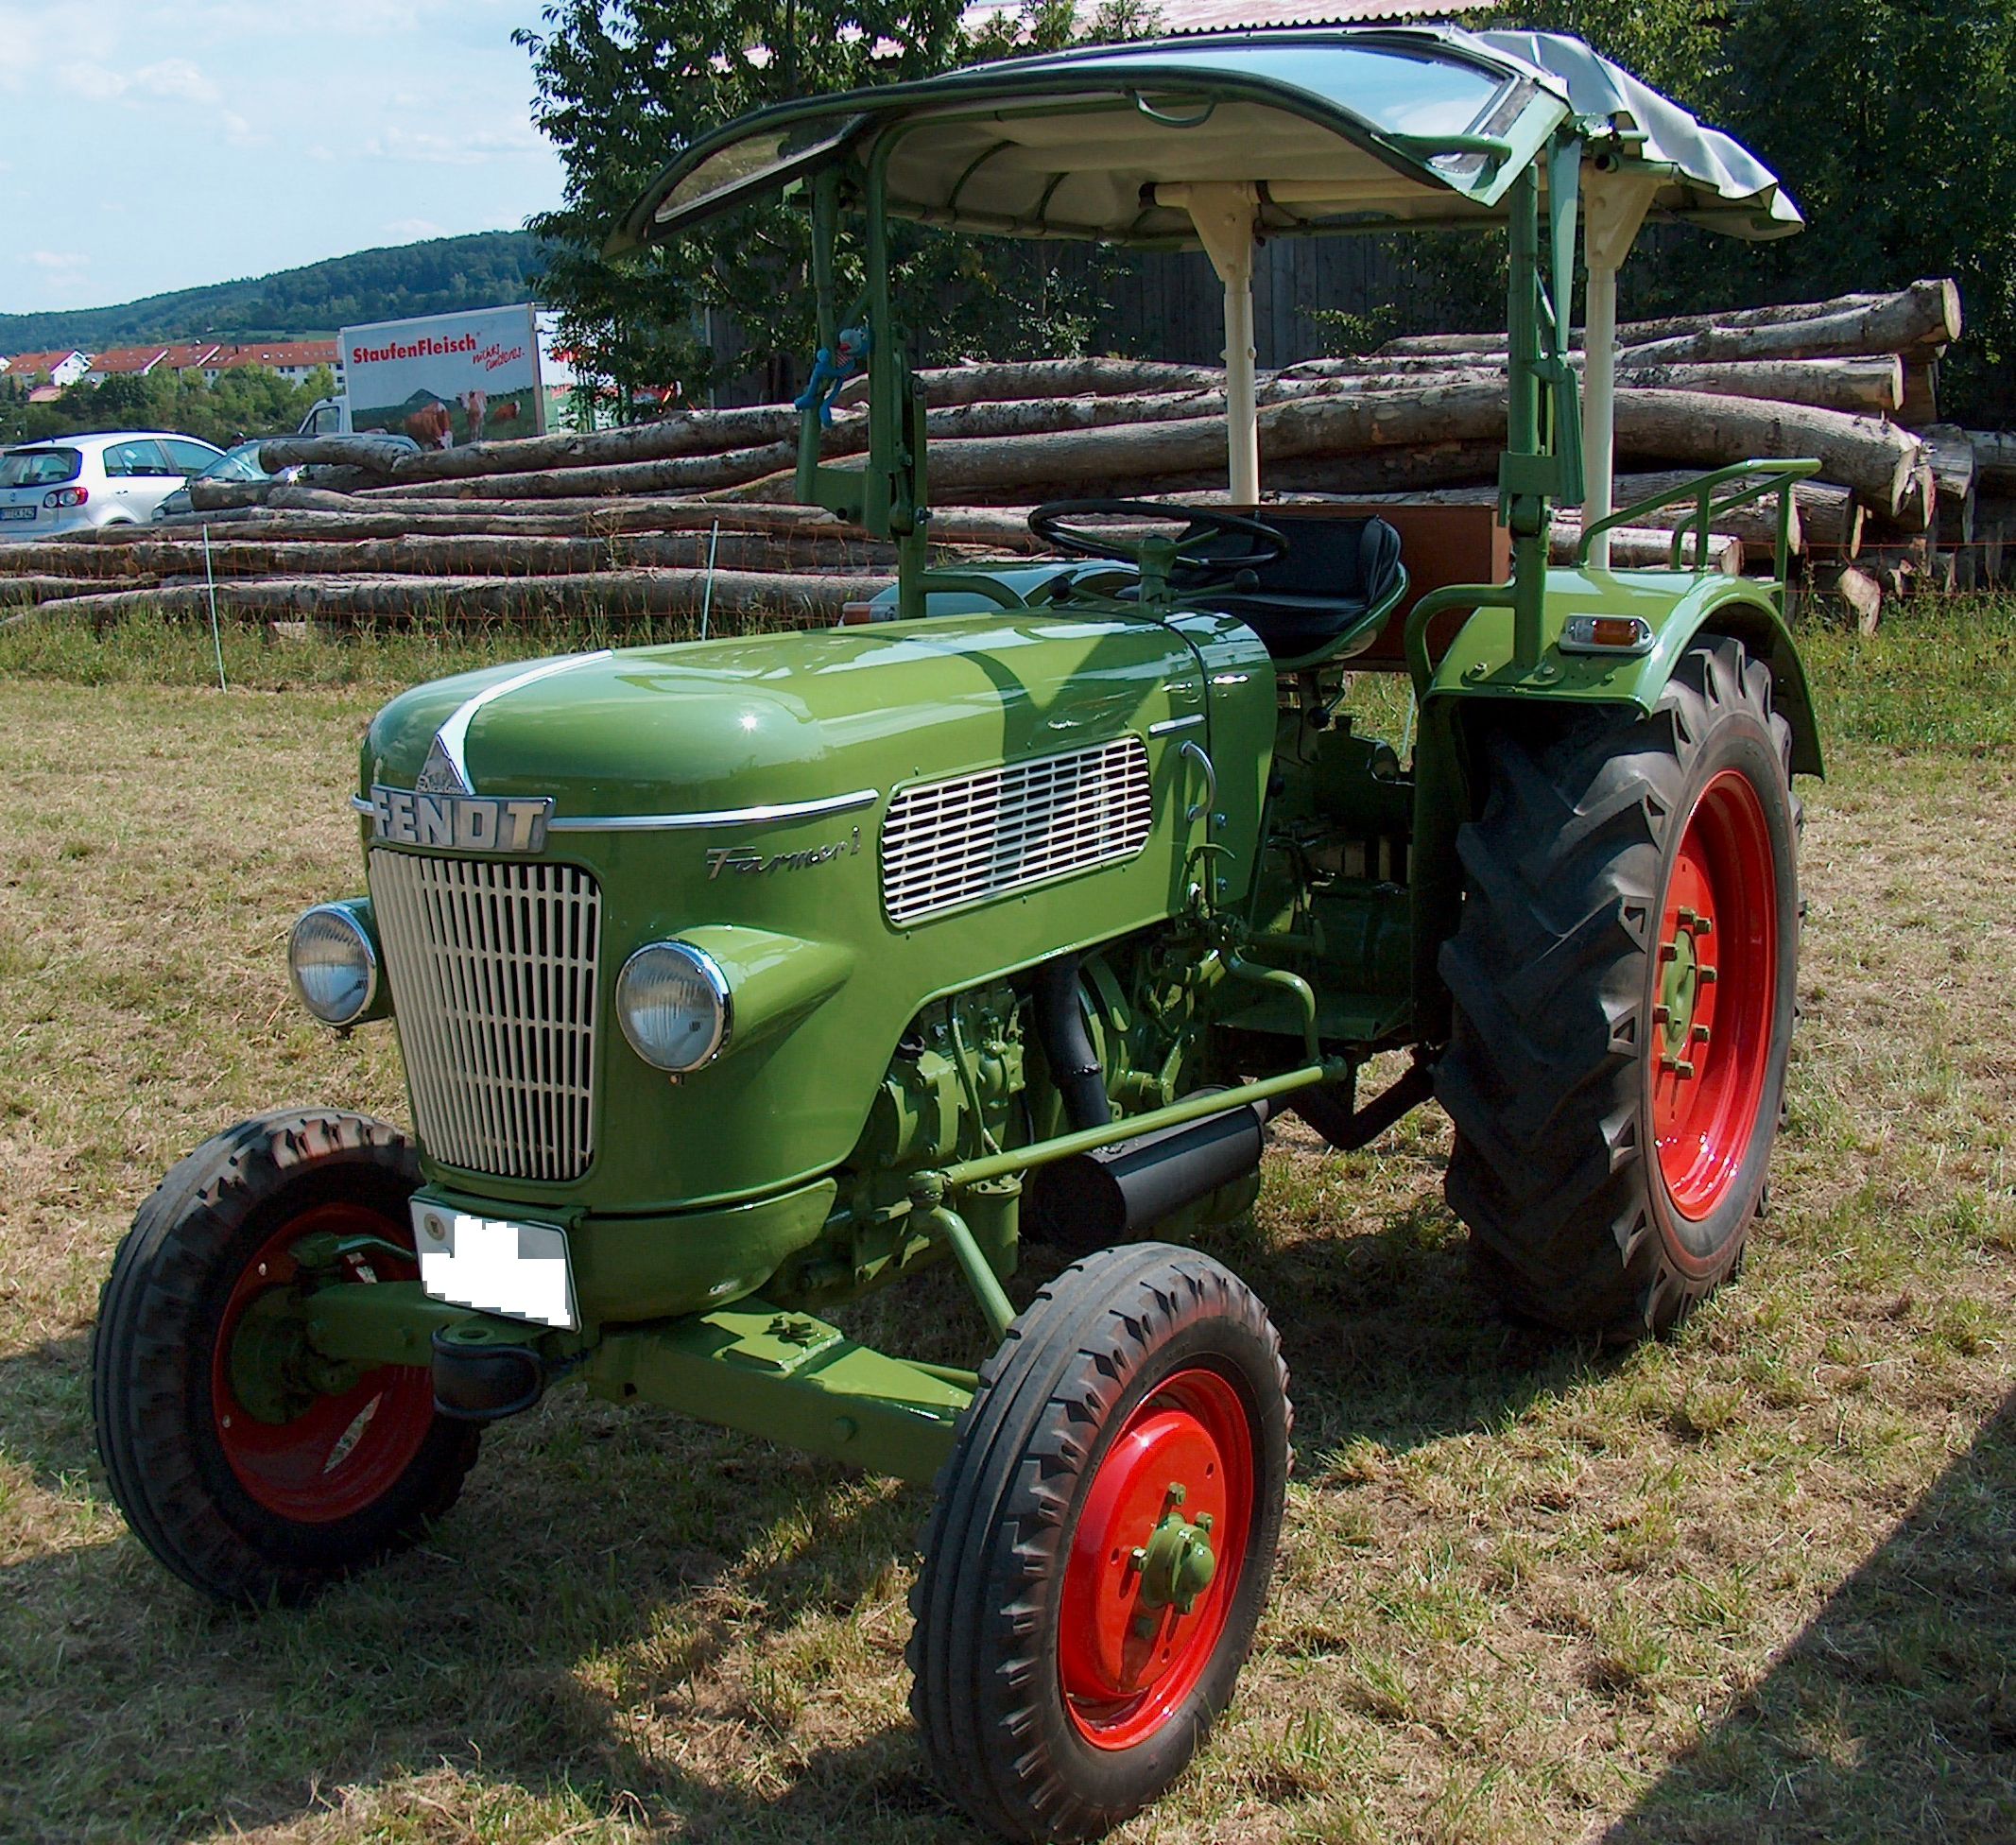 List of options and versions by Fendt farmer. Fendt farmer, Fendt ...